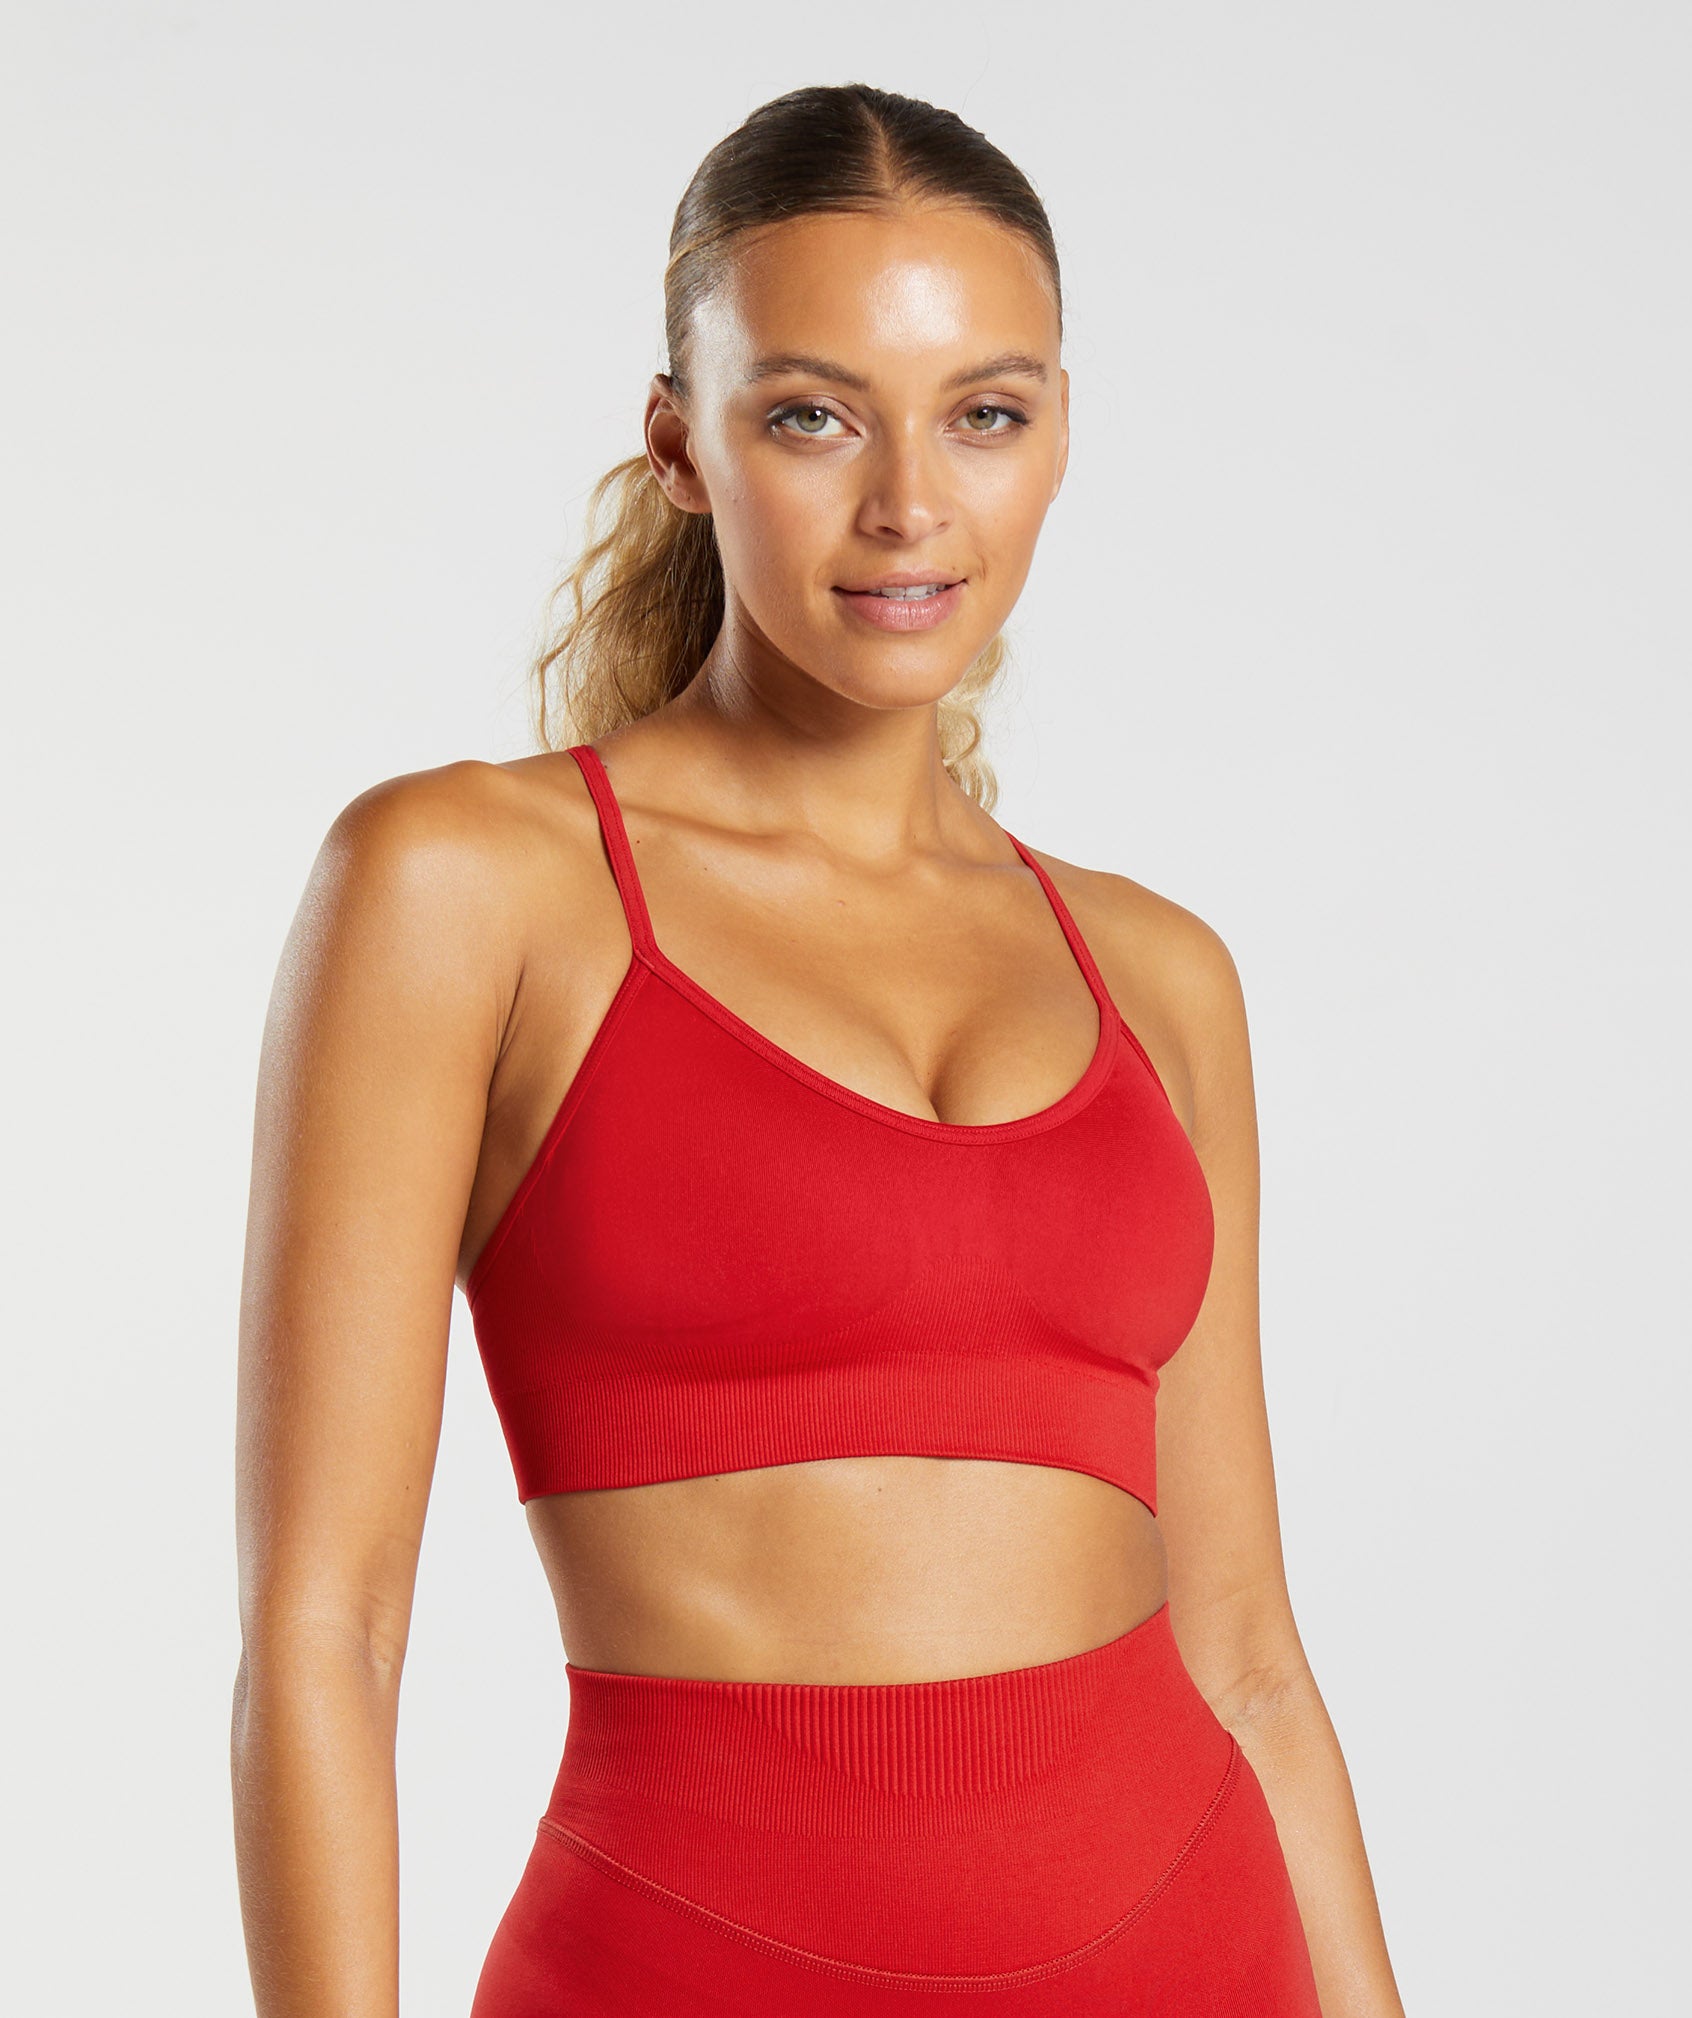  Lfzhjzc High Impact Sports Bras for Women High Impact Running,Removable  Chest Pad with Shock Absorption,Running Gym Bra (Color : Red, Size : 5X- Large) : Clothing, Shoes & Jewelry